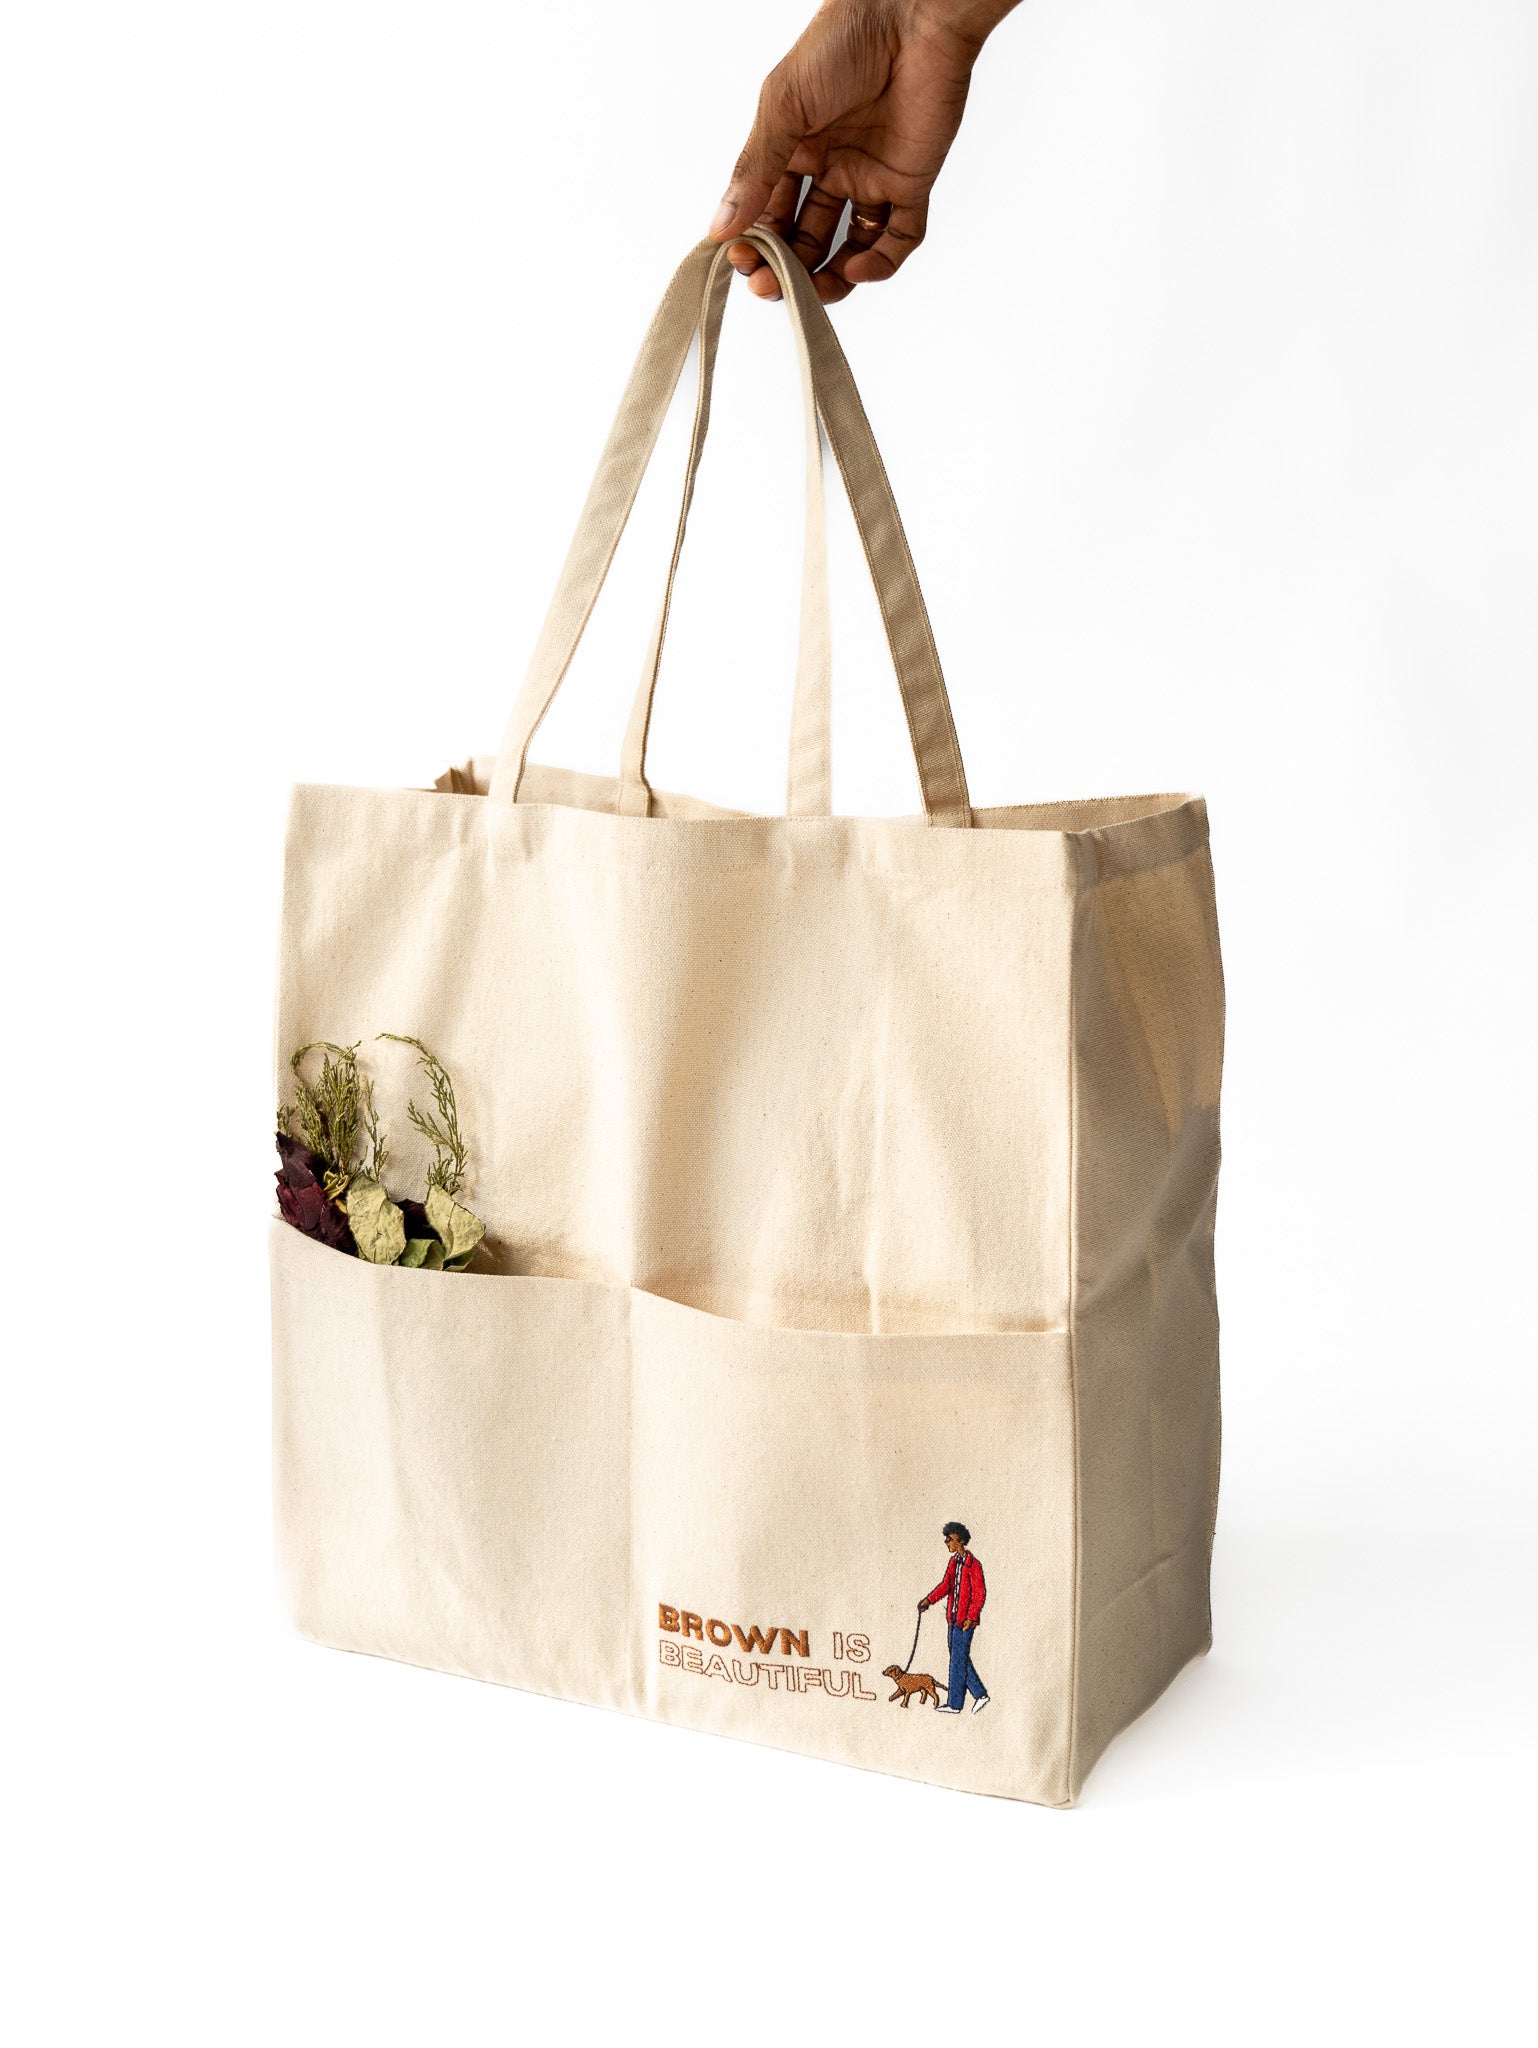 Mr. Brown with brown is beautiful text Off white Tote Bag